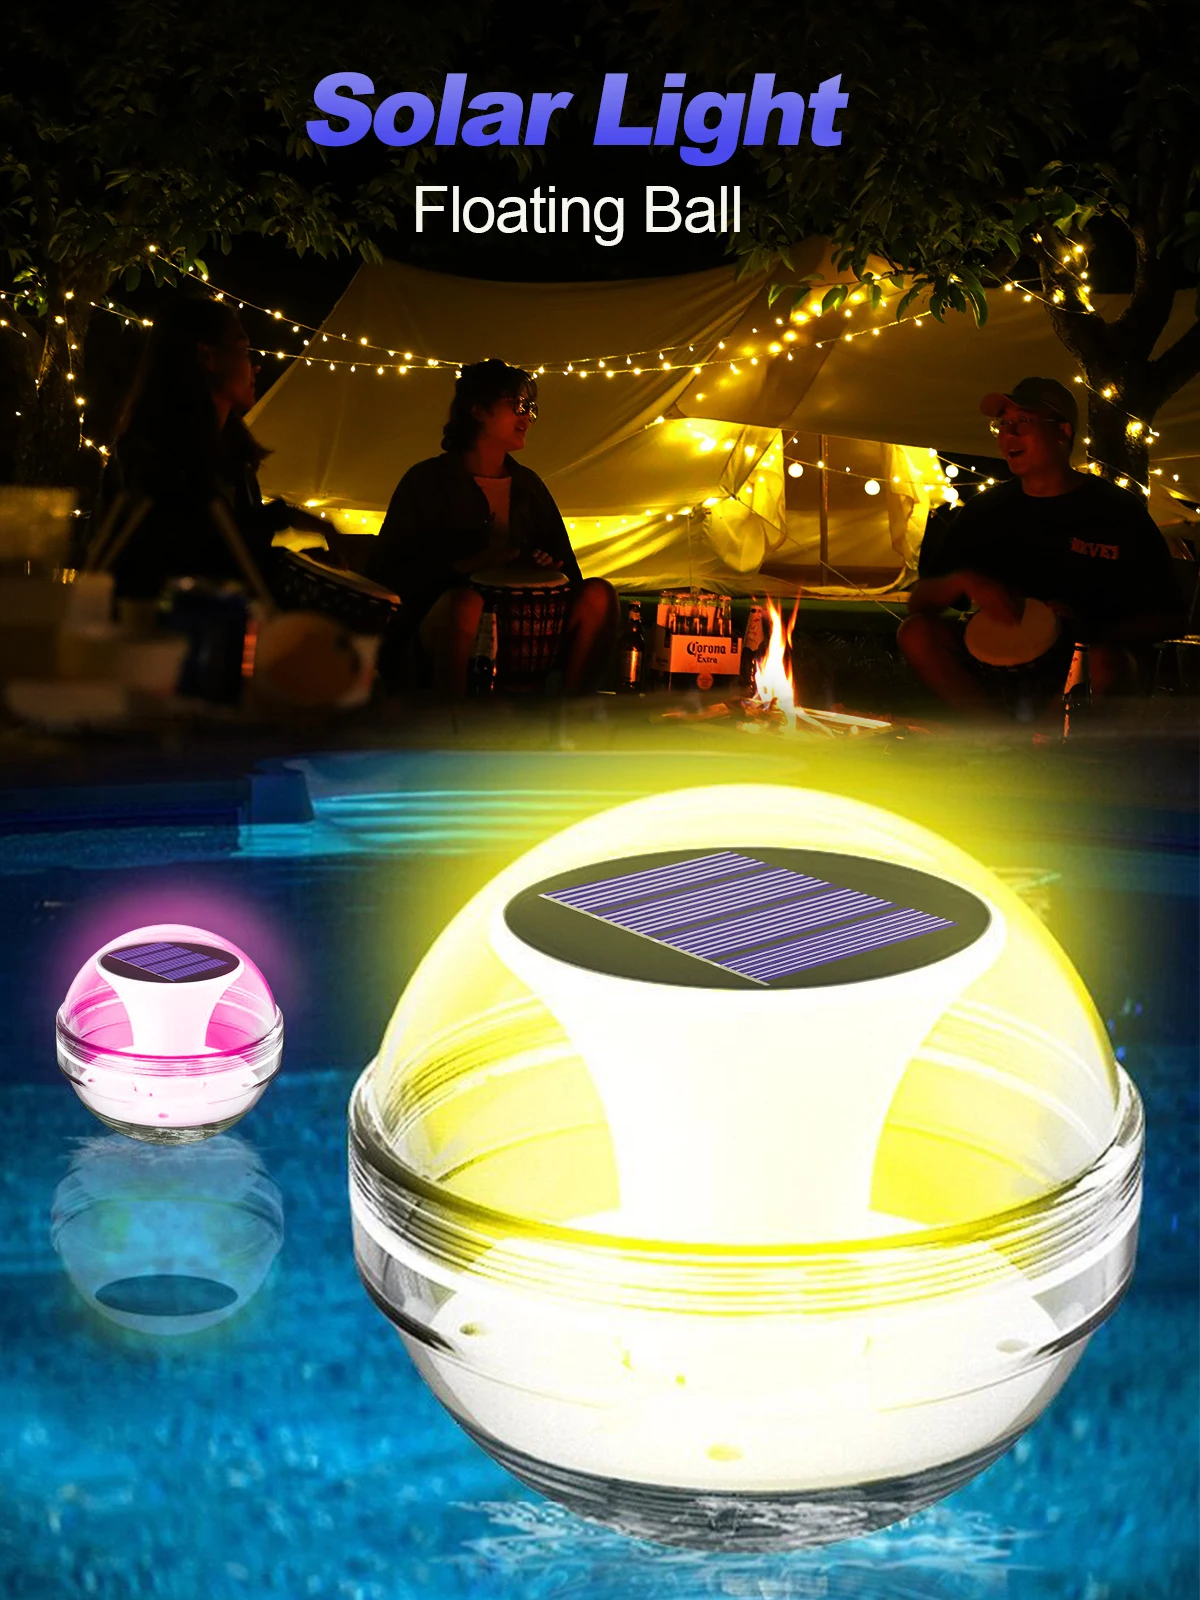 Floating Pool Lights Solar Pool Lights RGB Color Changing IP65 Waterproof LED Night Light for Swimming Pool Hot Tub Pond Decor